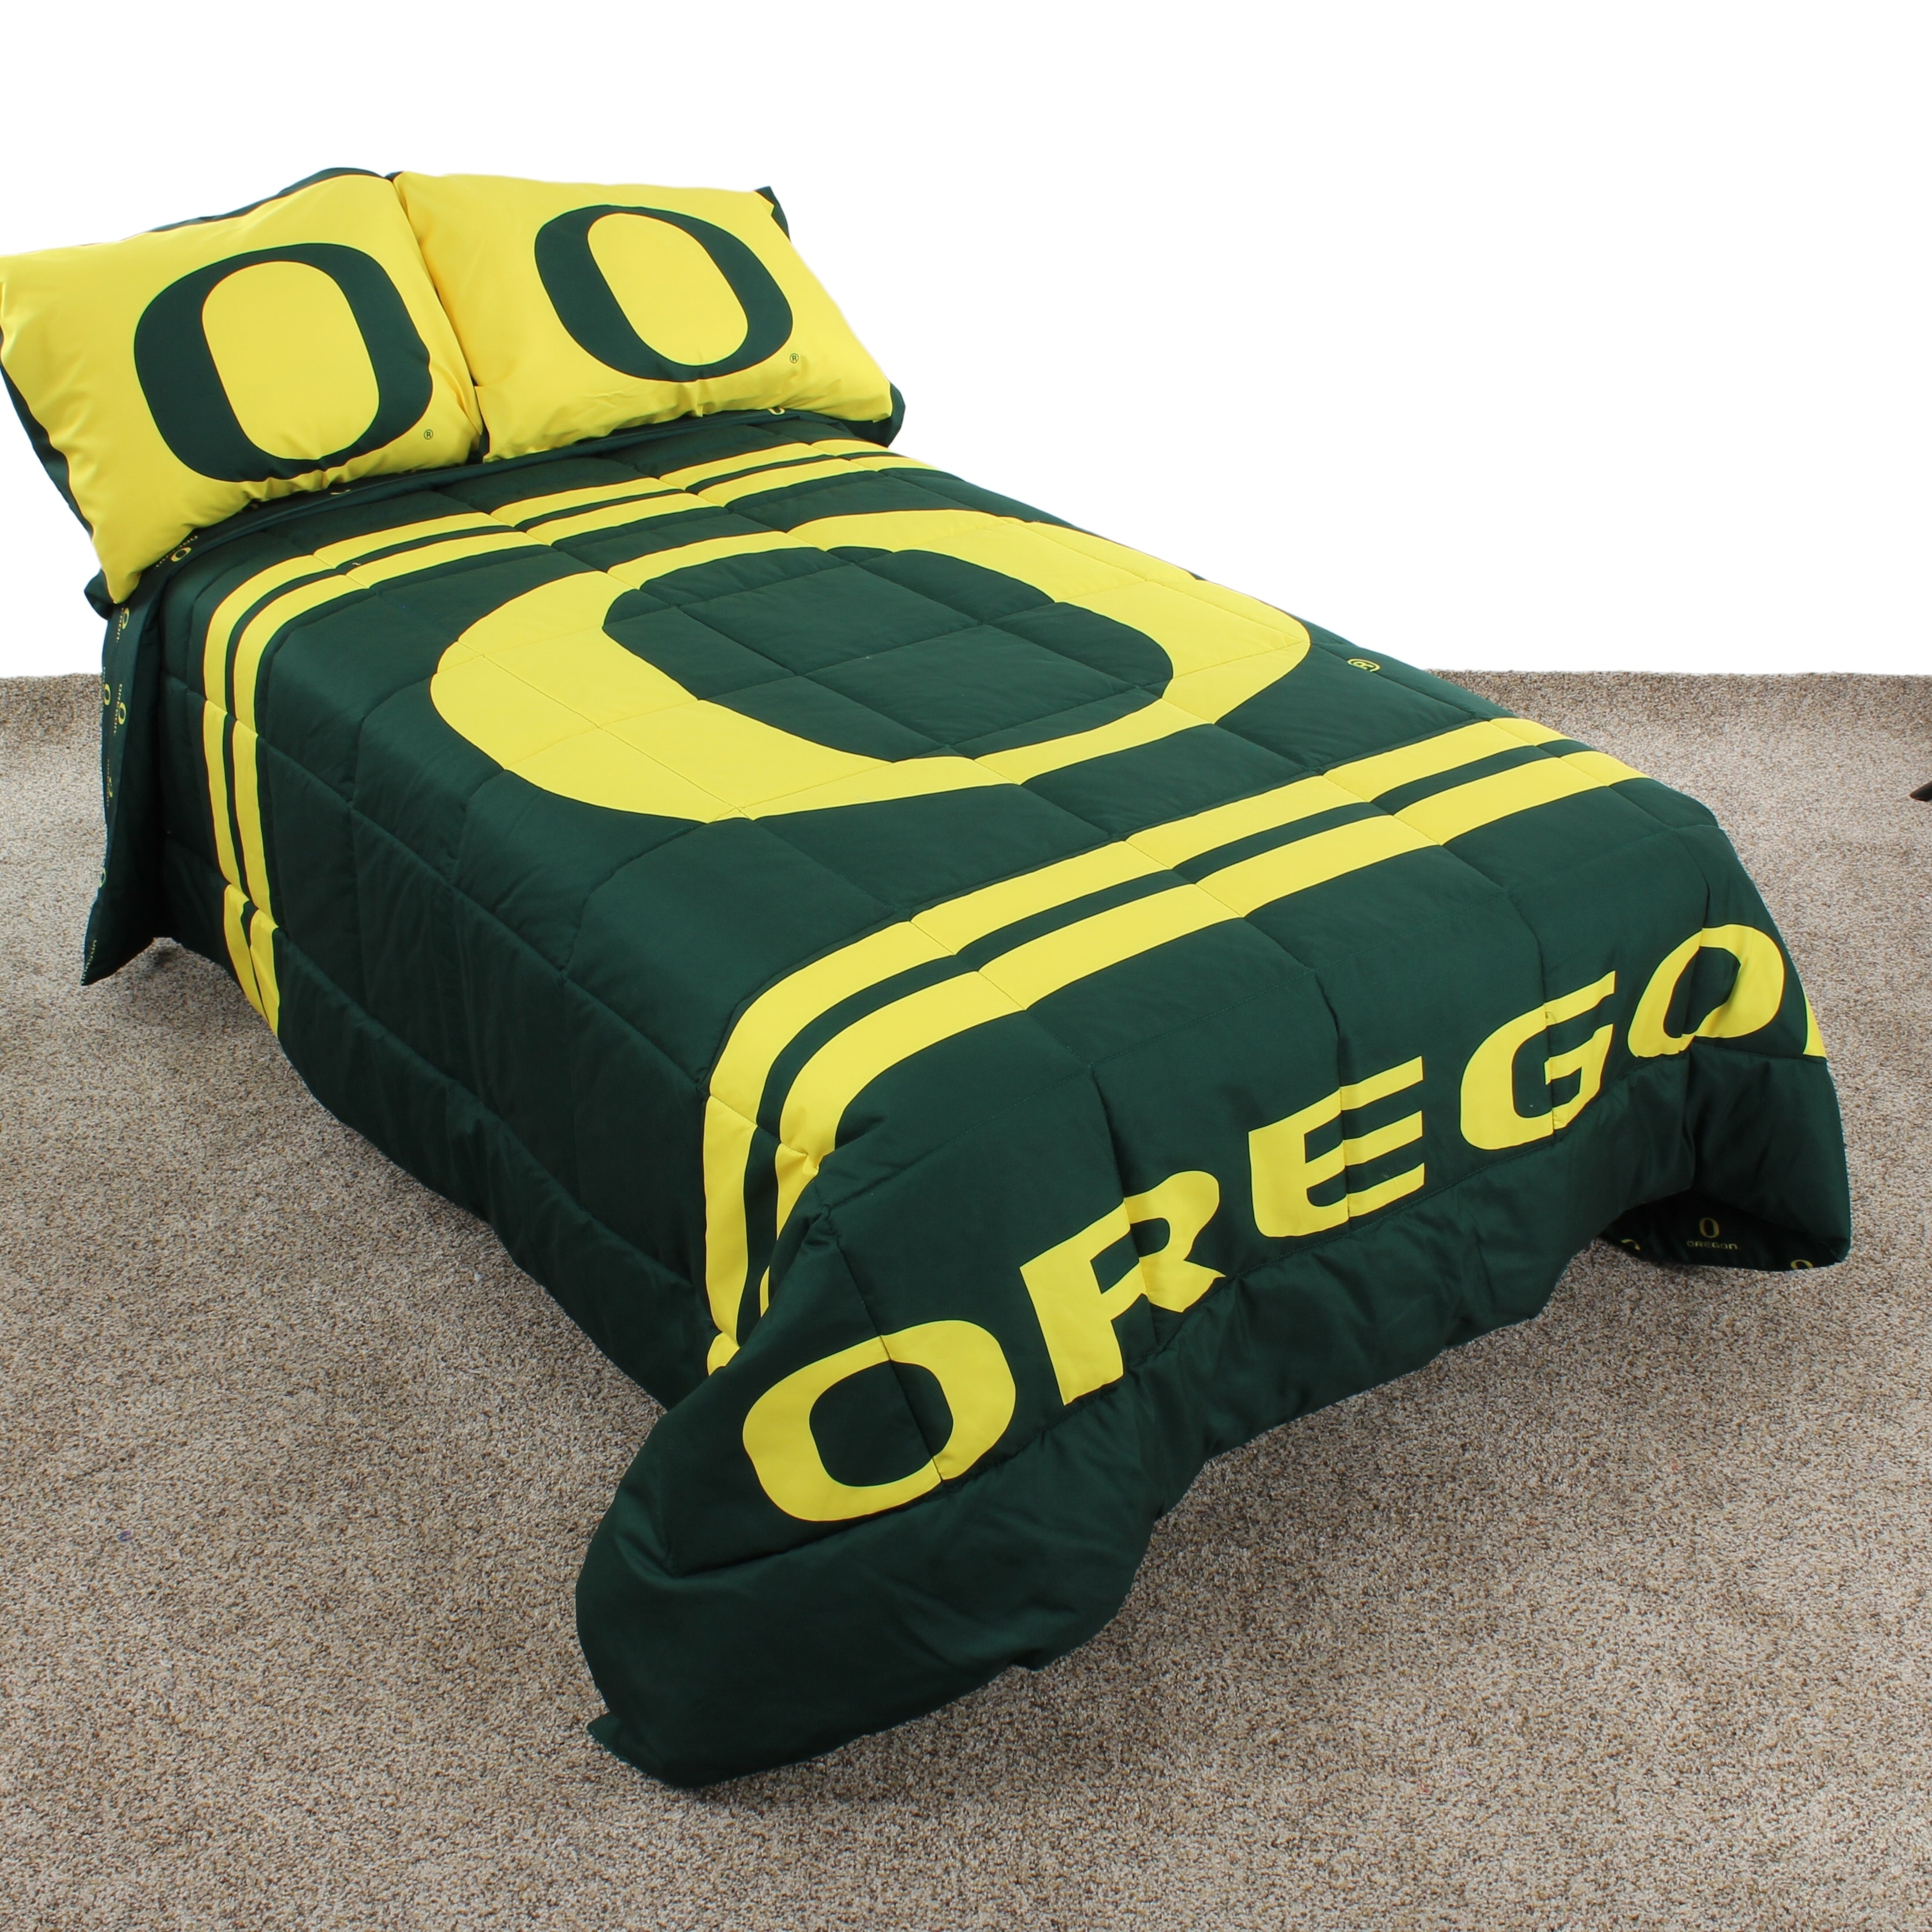 Queen College Covers Oregon Ducks Printed Dust Ruffle